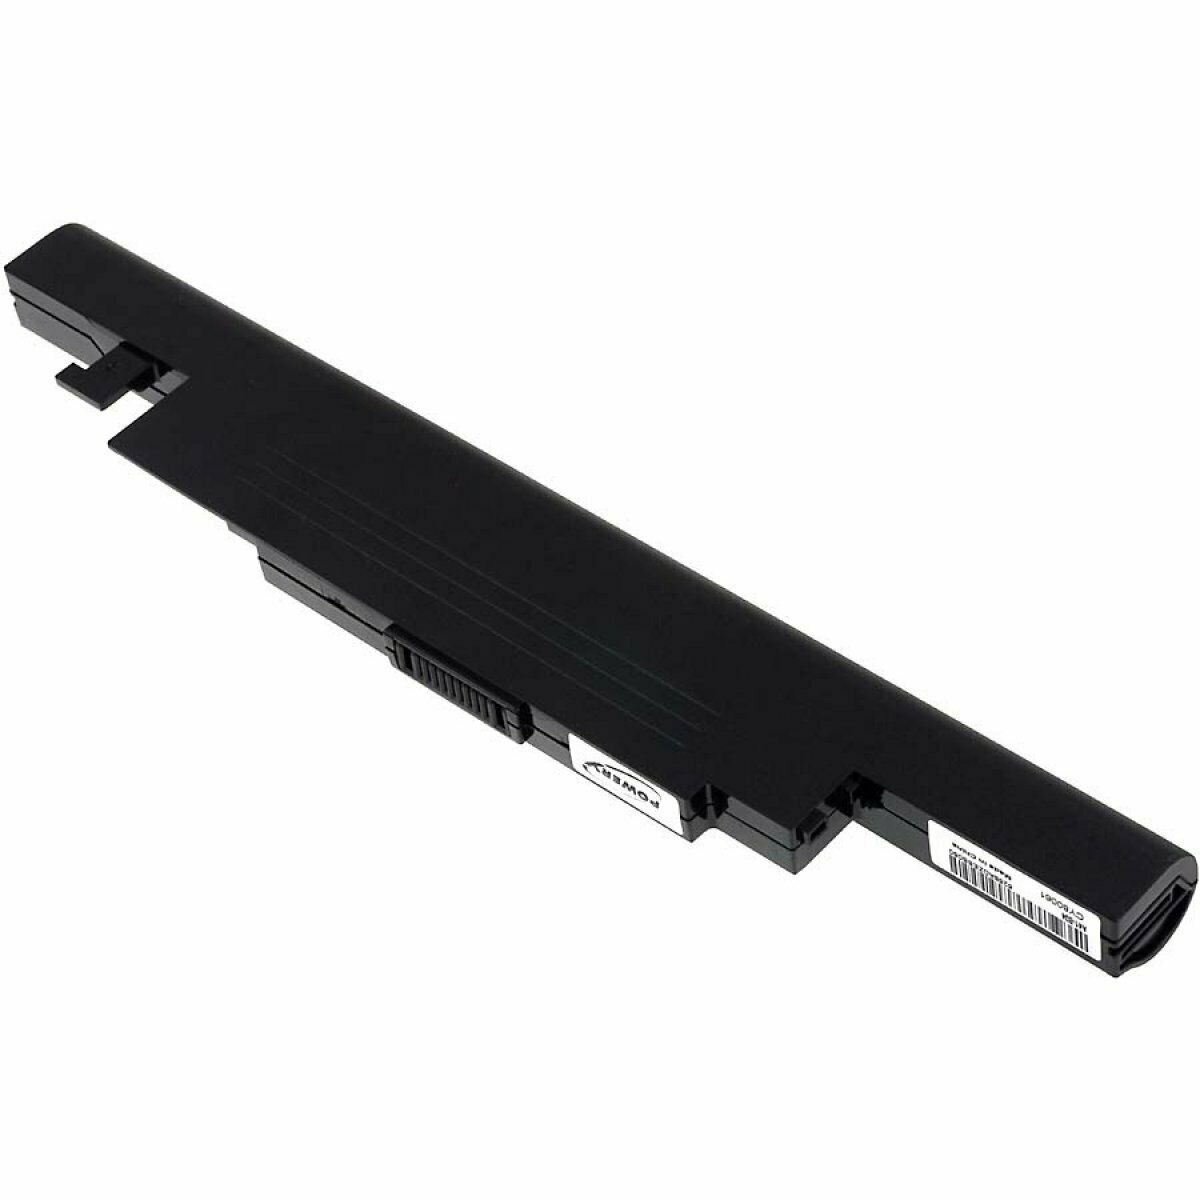 Batterie pour A41-B34 A32-B34 Pegatron B34FB B34FD B34YA C15B(90N0-CN2S310) Haier S500(compatible)